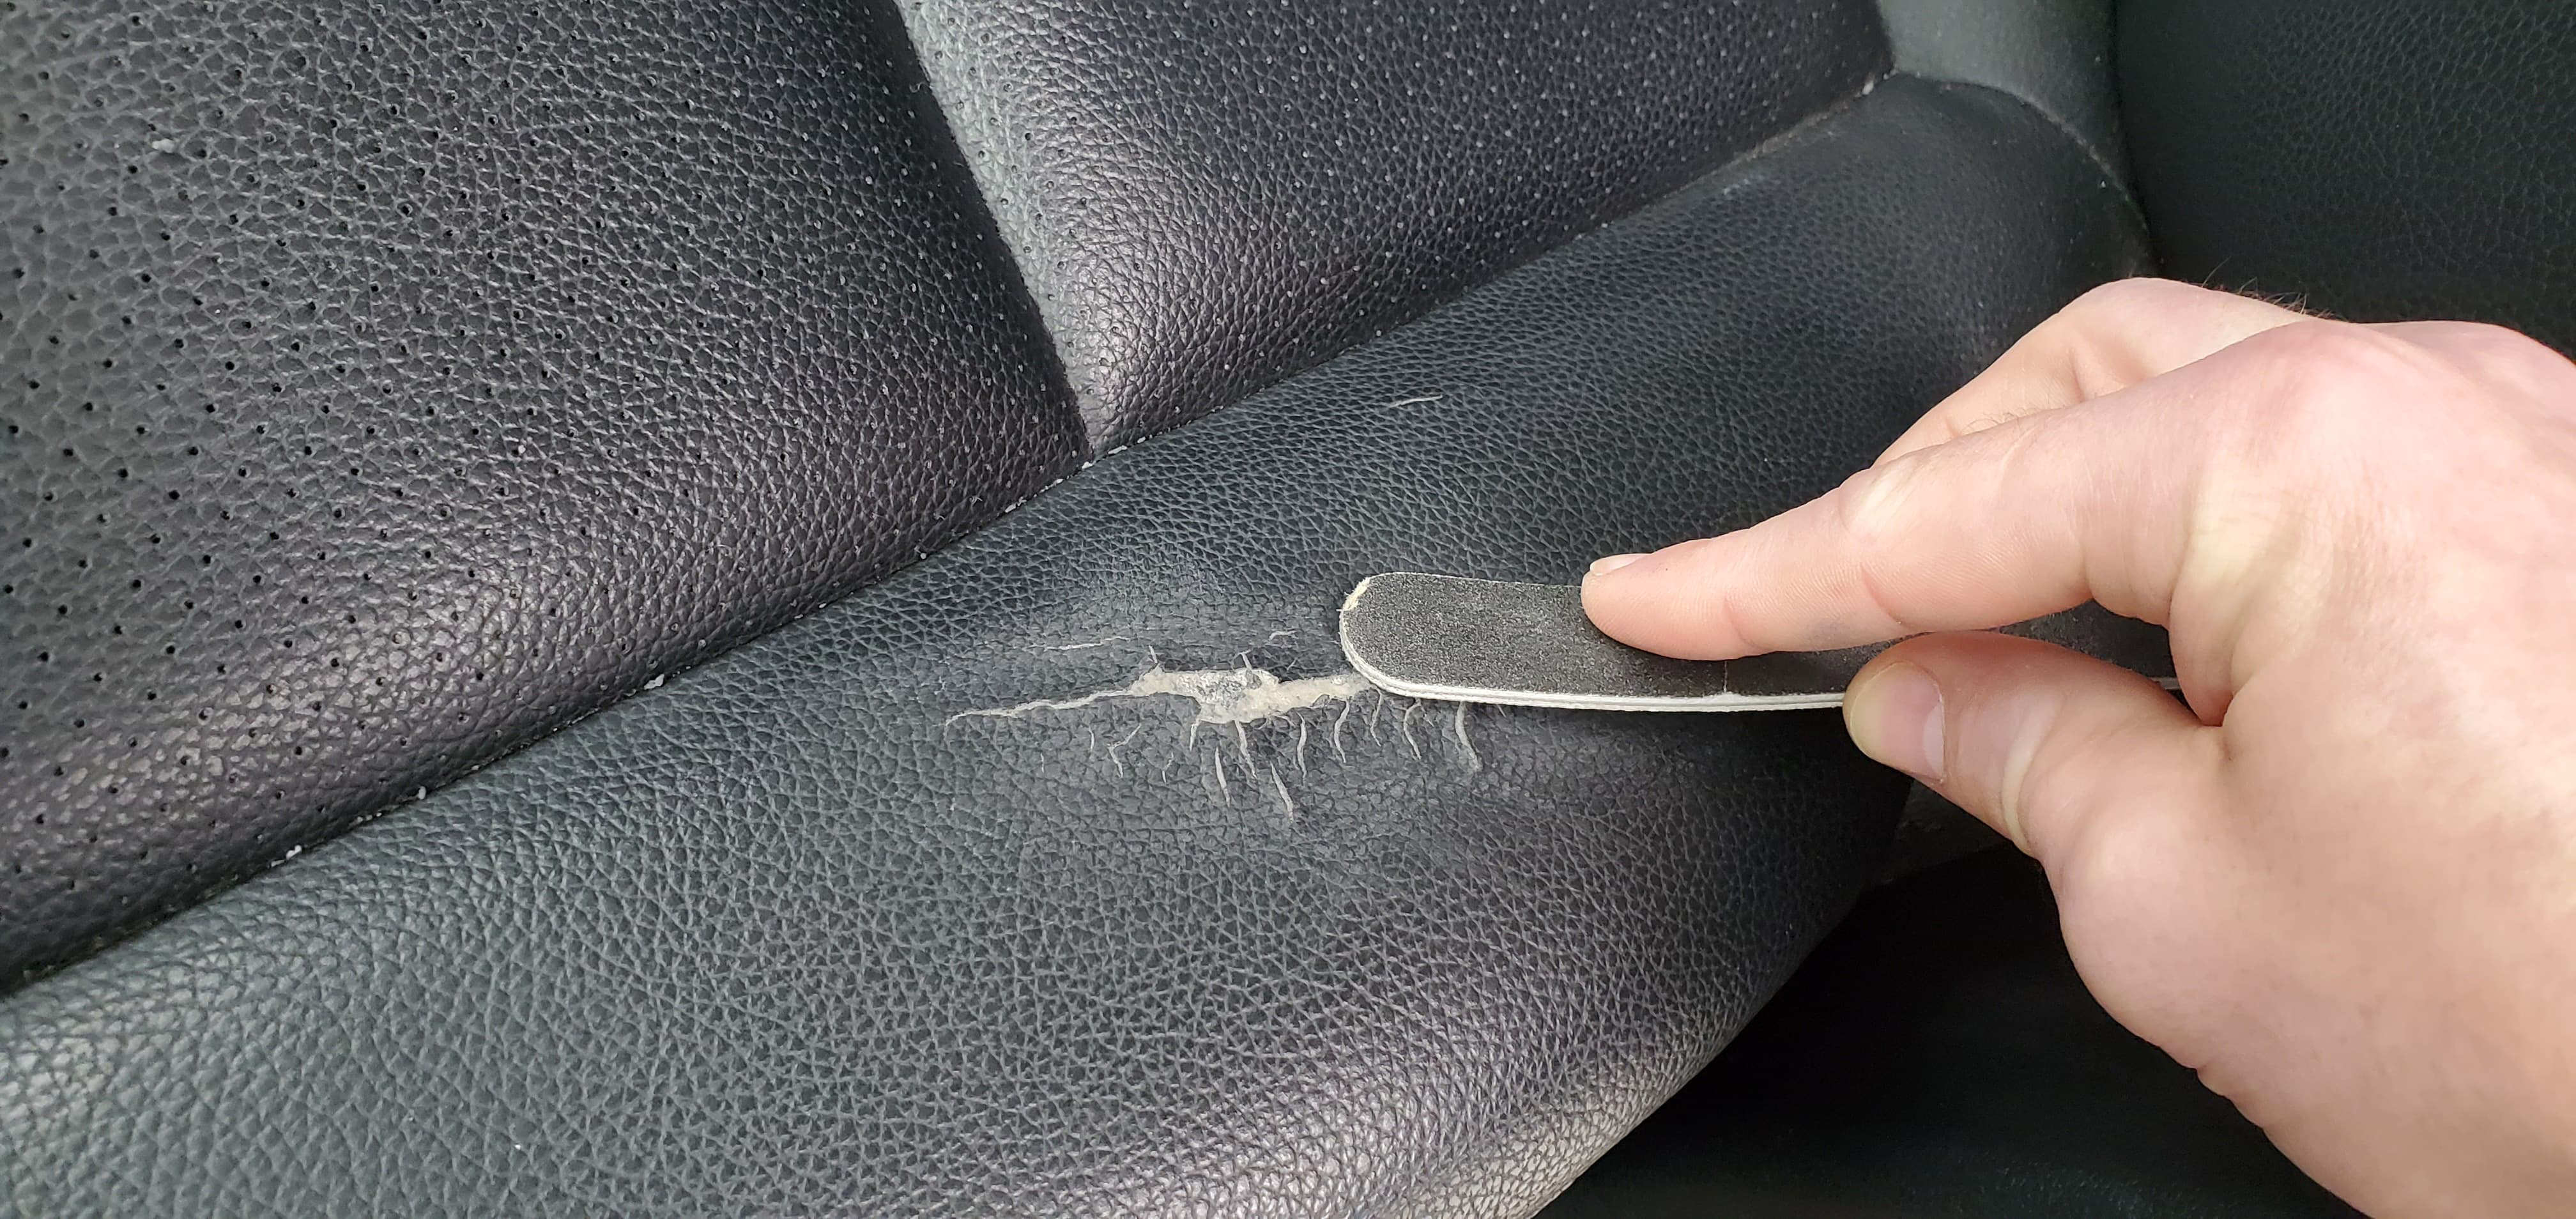 How To Repair A Leather Car Seat - How To Fix A Small Hole In Leather Seat